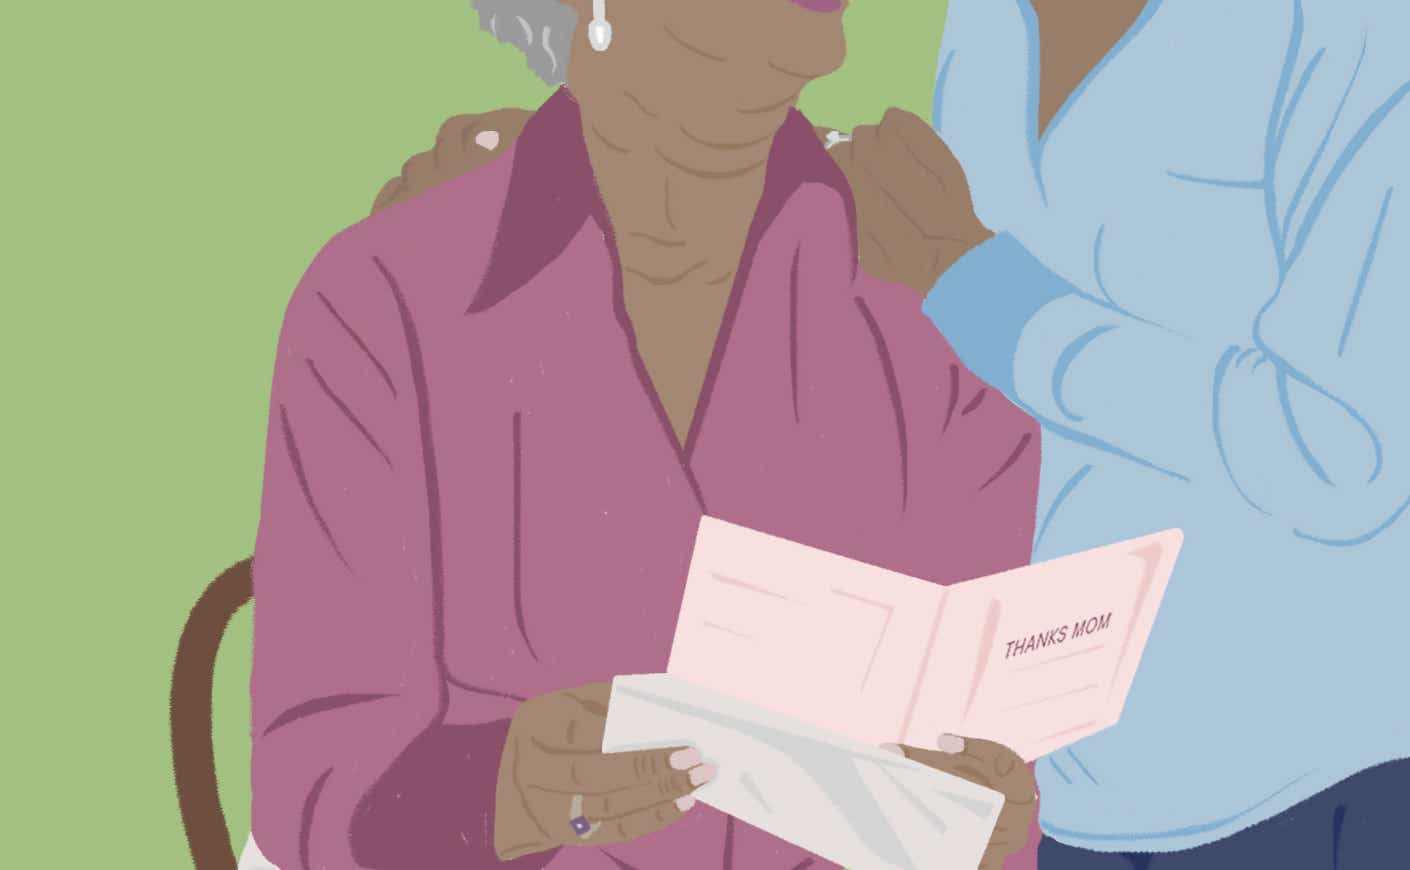 illustration of a mother reading a thank you card and embracing another woman